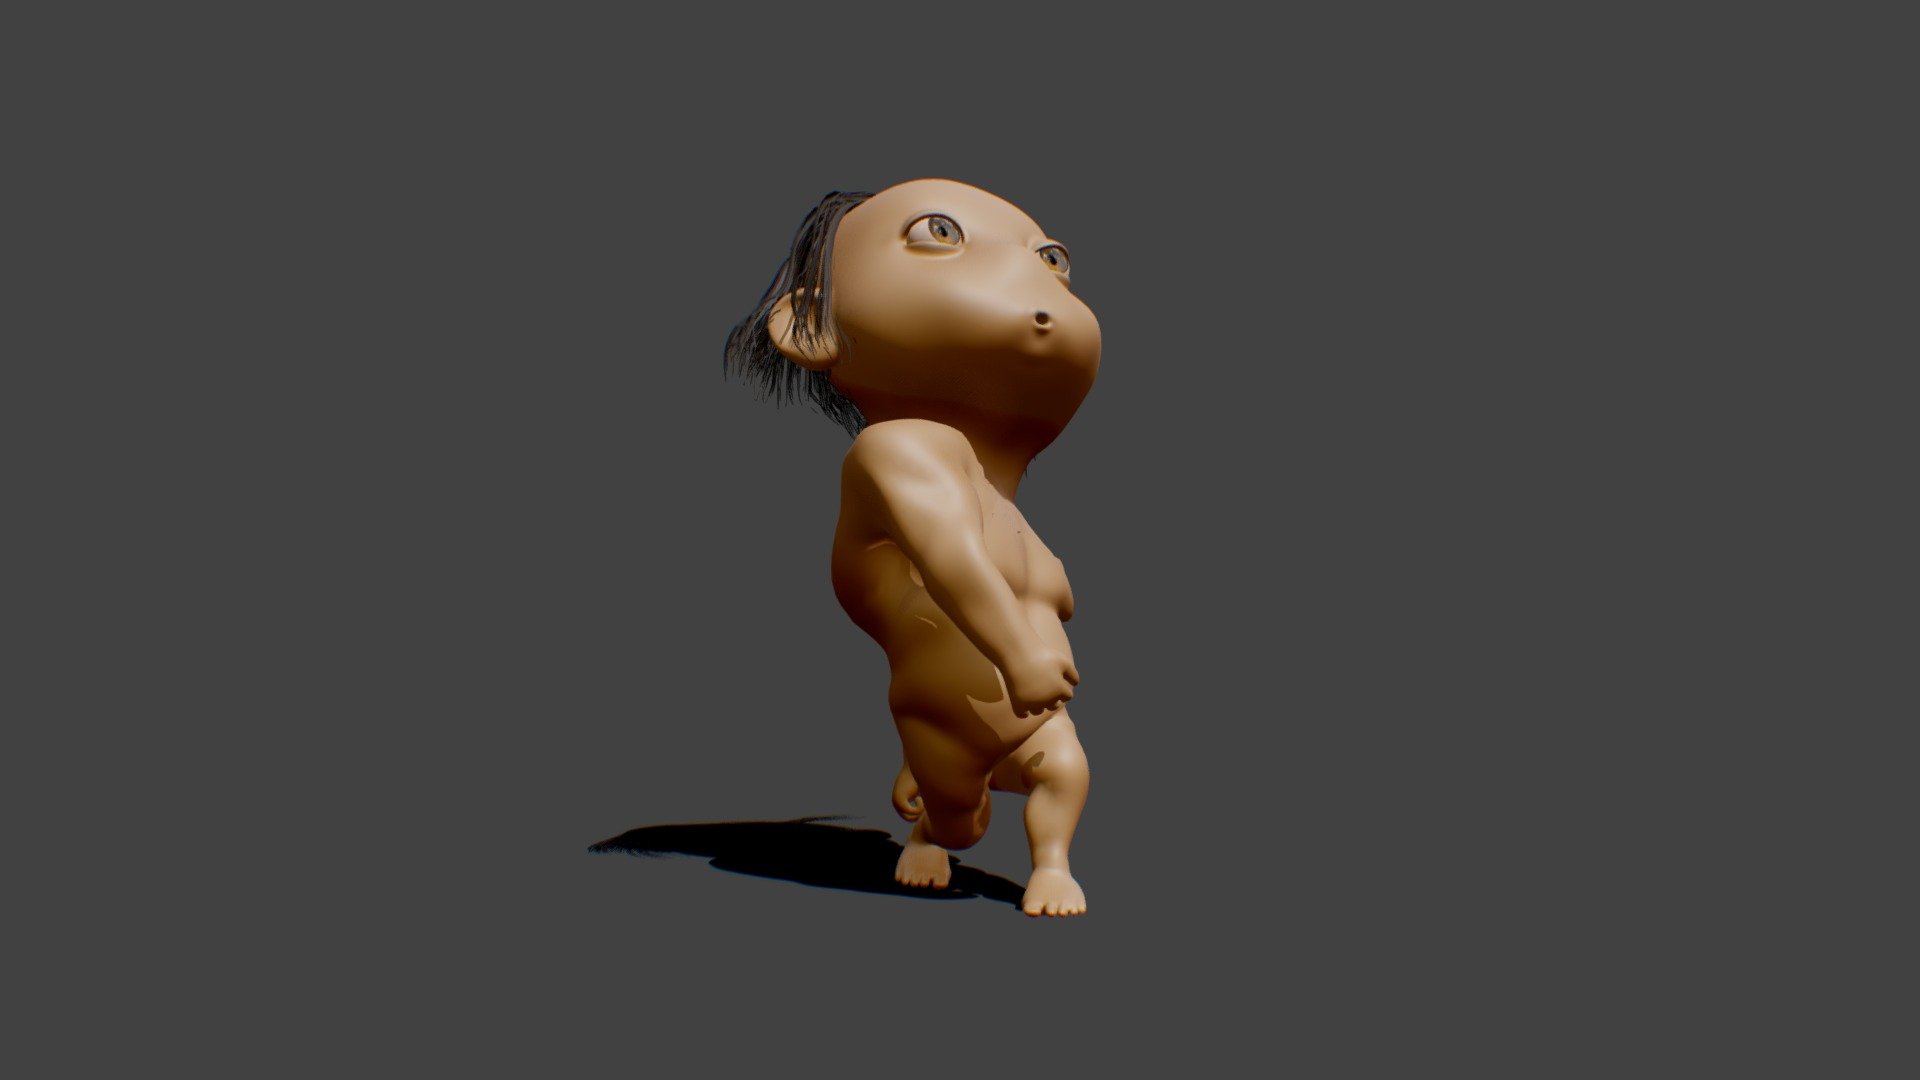 See the desciption here https://skfb.ly/oK8Yt

So this is the almost completed version, all that is left is to do the hair animation/ rigging, and finalised the clothes and rigging.

Thanks to https://www.youtube.com/@tinynocky for their TinyEye plugin 3d model